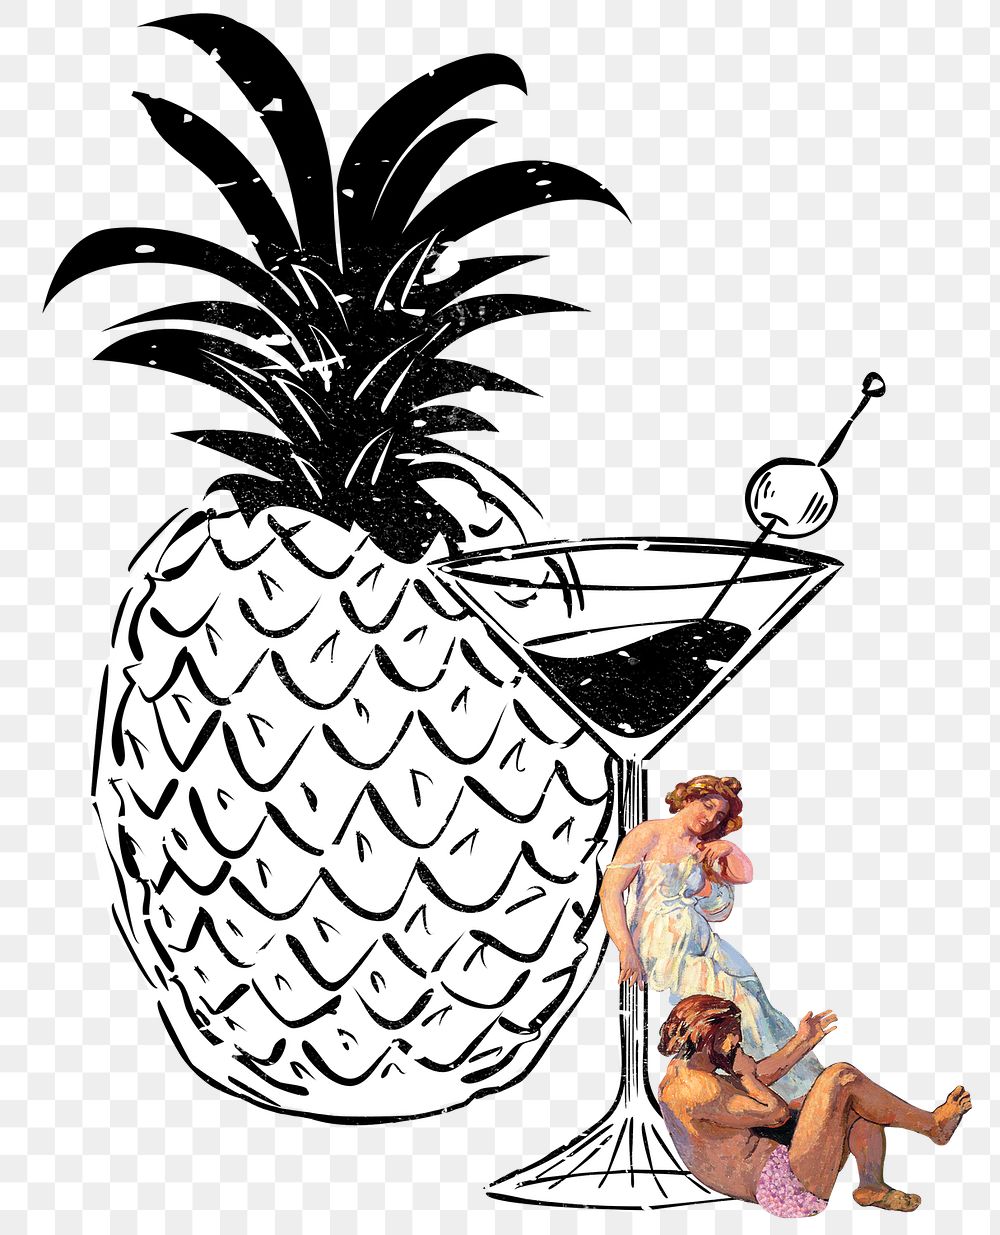 Pineapple png with vintage people mixed media, remixed from artworks by Maurice Denis